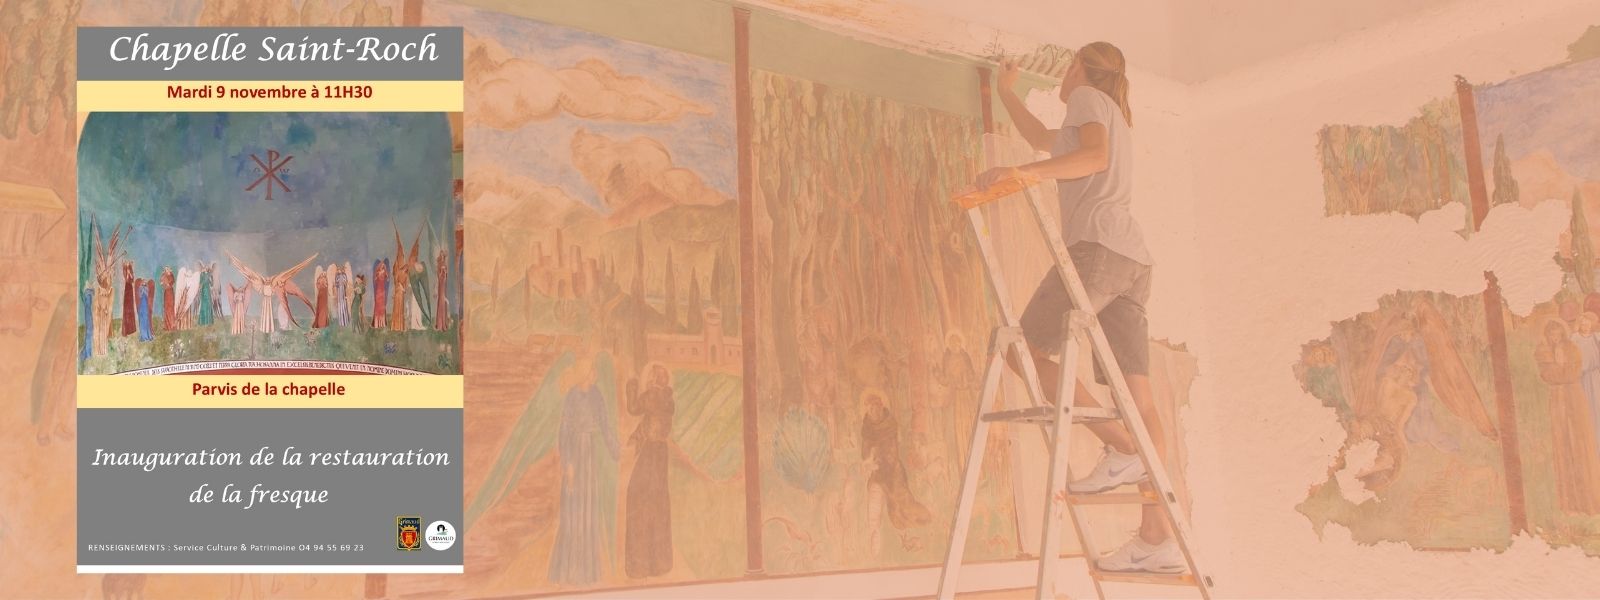 Invitation: Tuesday, November 9 2021 - discovery of the restoration of the fresco in the Saint-Roch chapel